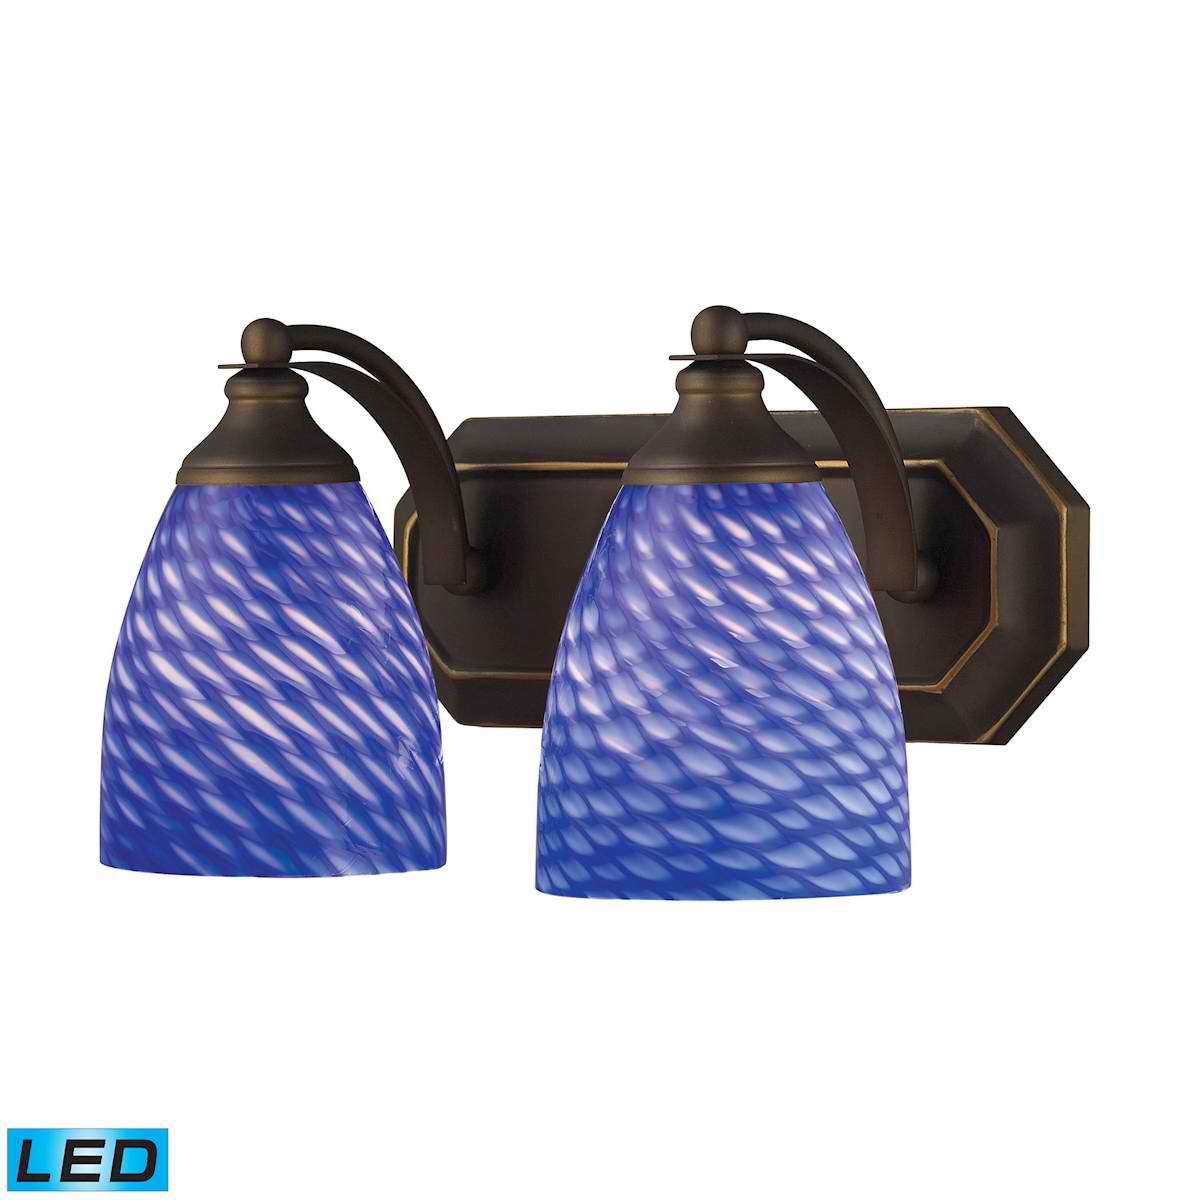 2 Light Vanity in Aged Bronze and Sapphire Glass - LED, 800 Lumens (1600 Lumens Total) with Full Scale